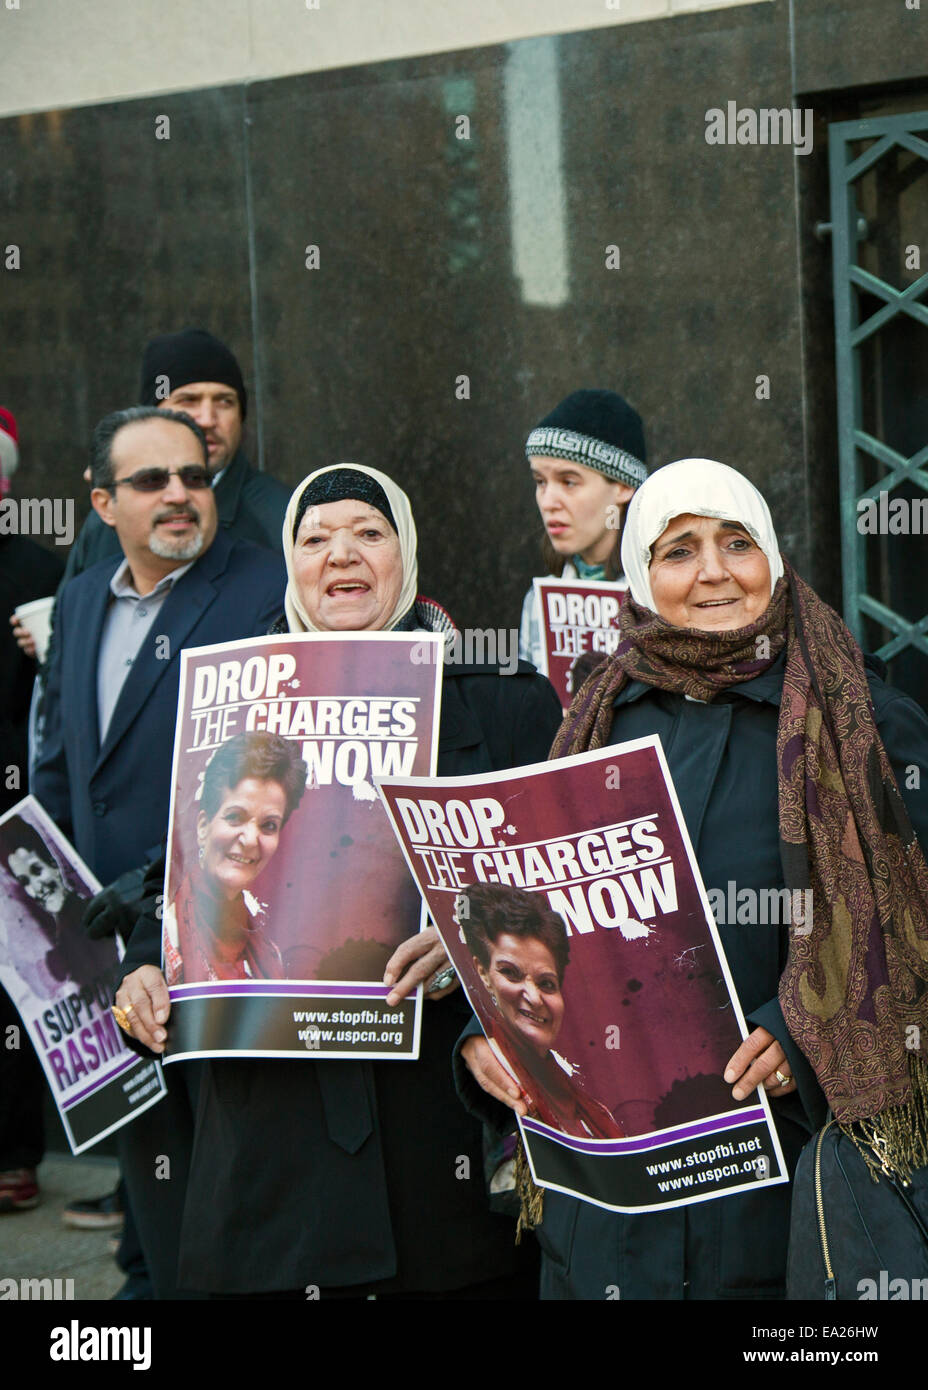 Detroit,  Michigan, USA. 5th November, 2014. Supporters of Palestinian-American activist Rasmea Odeh hold a vigil outside the Federal Courthouse as a trial begins that could imprison her for 10 years and revoke her U.S. citizenship. The government charges that Odeh lied on her 2004 citizenship application by not disclosing that in 1969 she had been imprisoned and tortured by the Israeli military. Credit:  Jim West/Alamy Live News Stock Photo